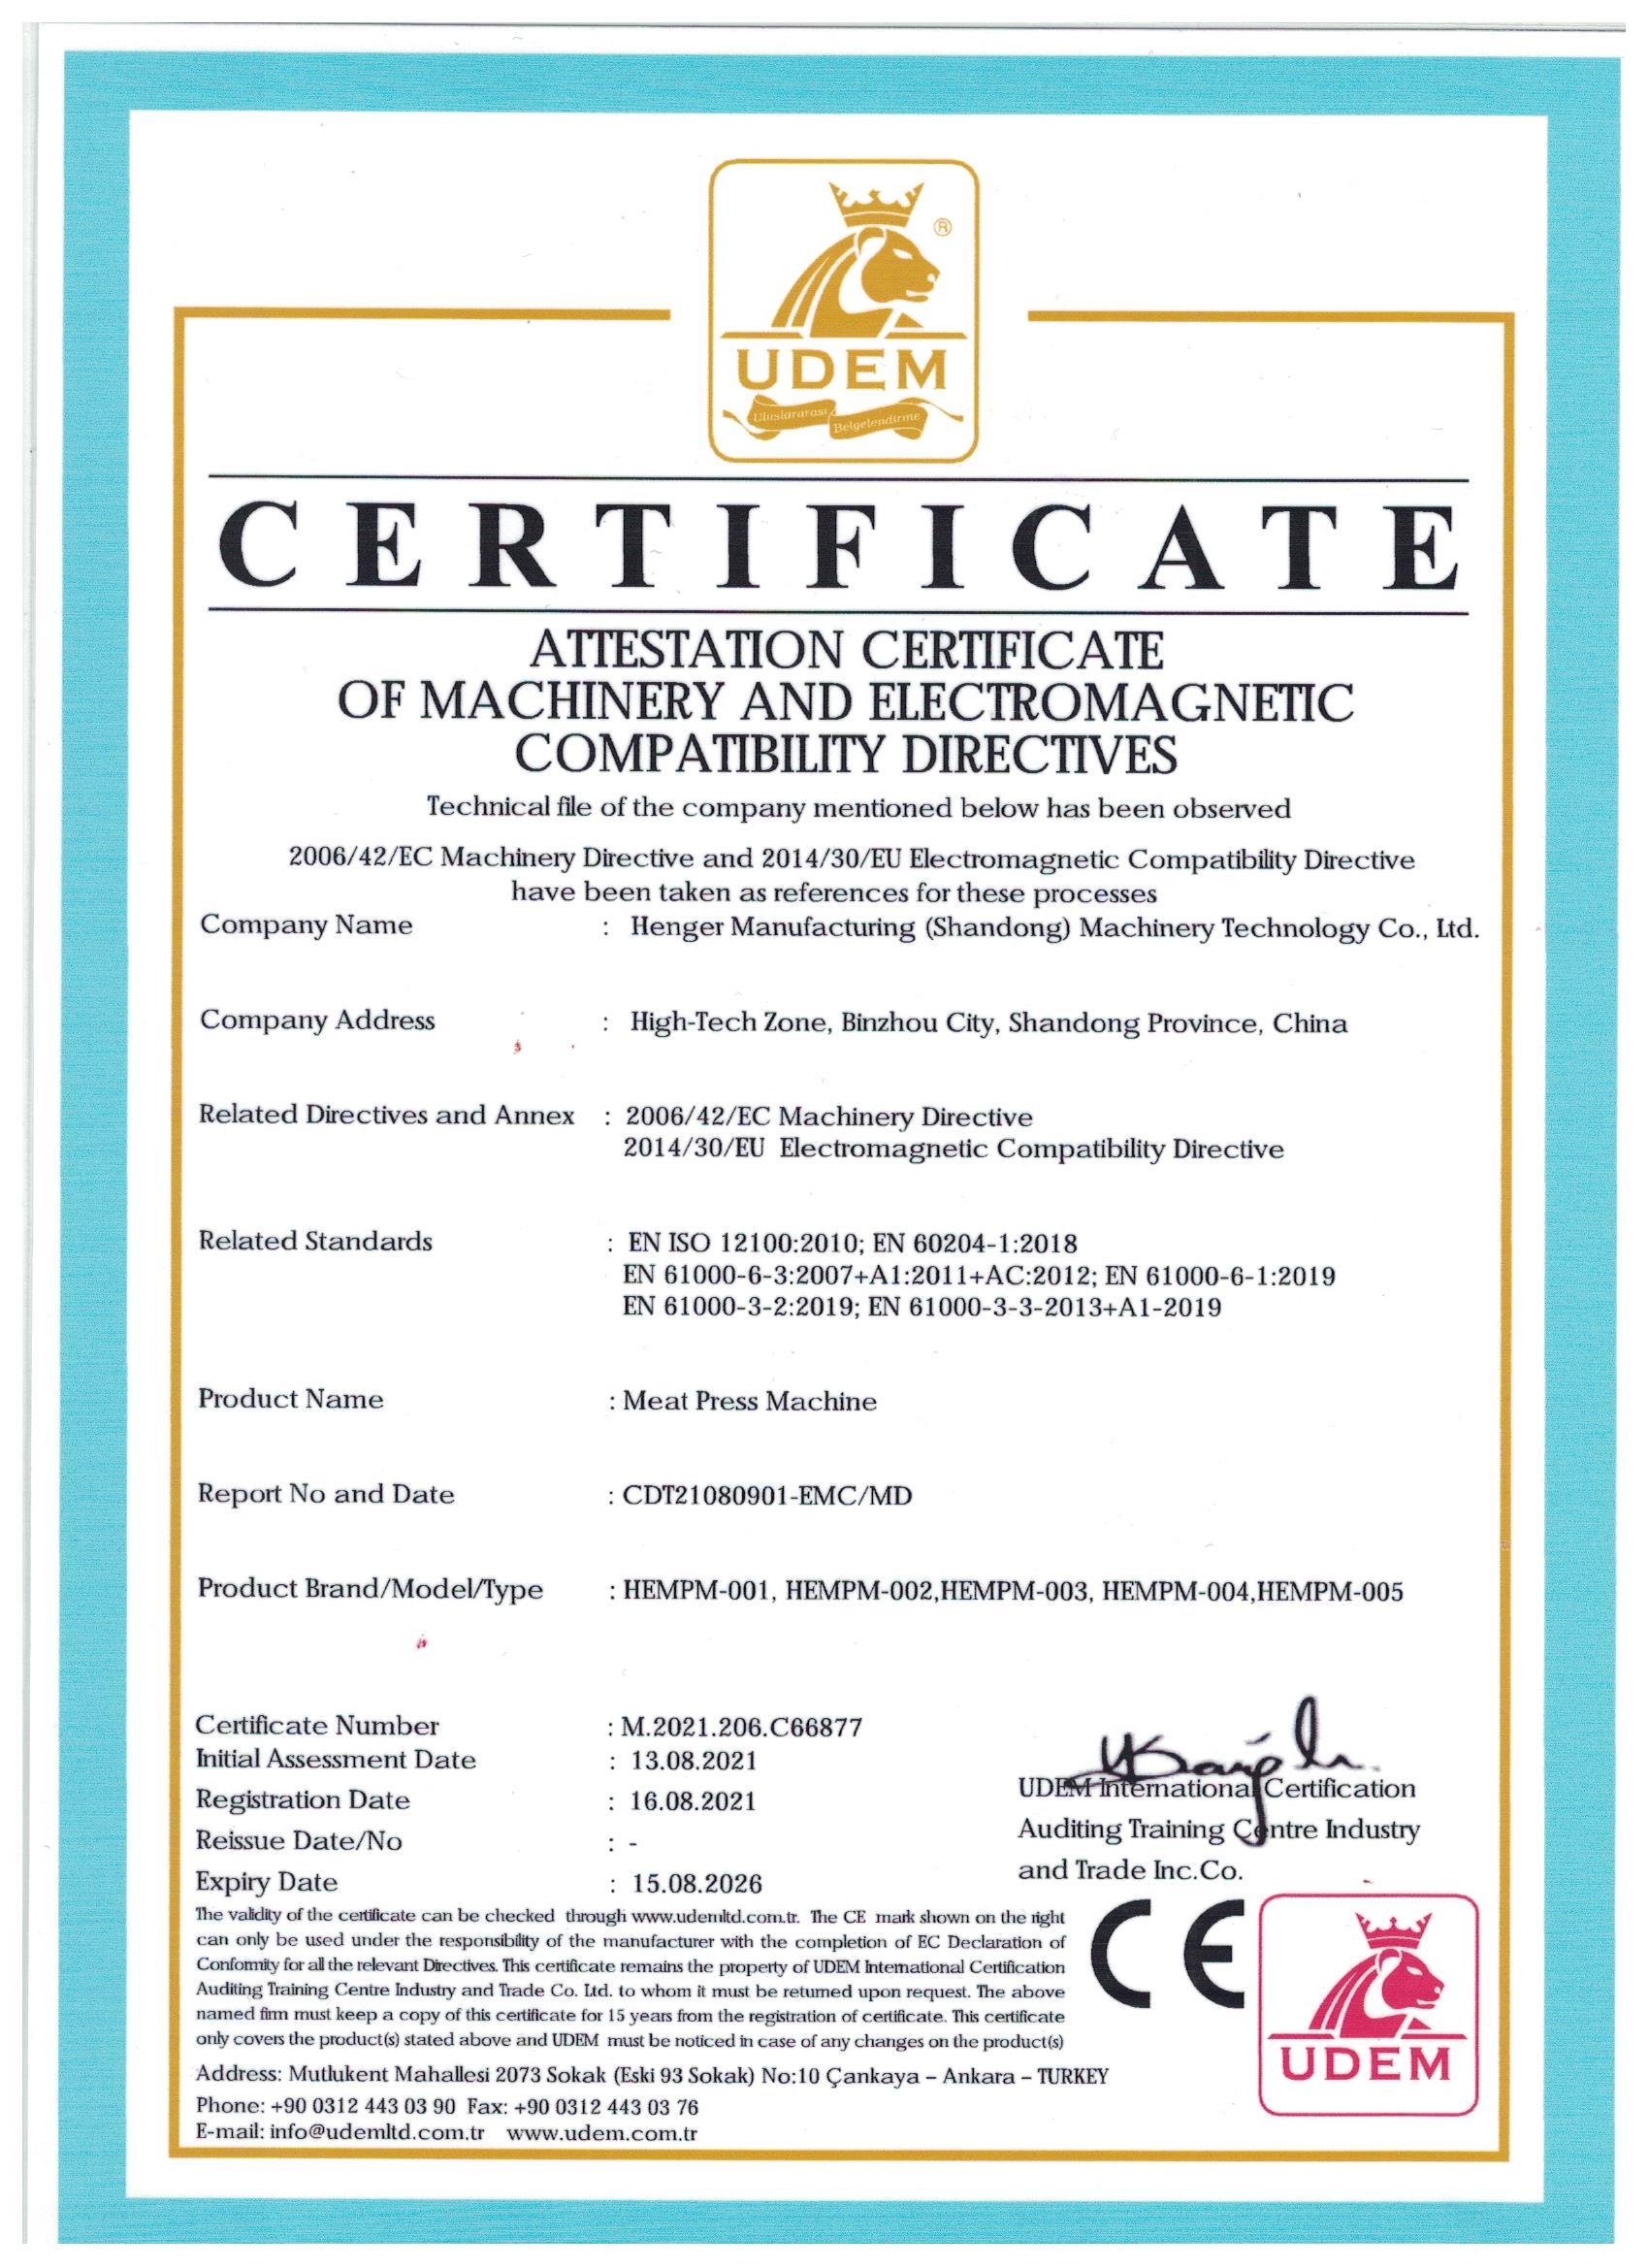 PRODUCT CERTIFICATE